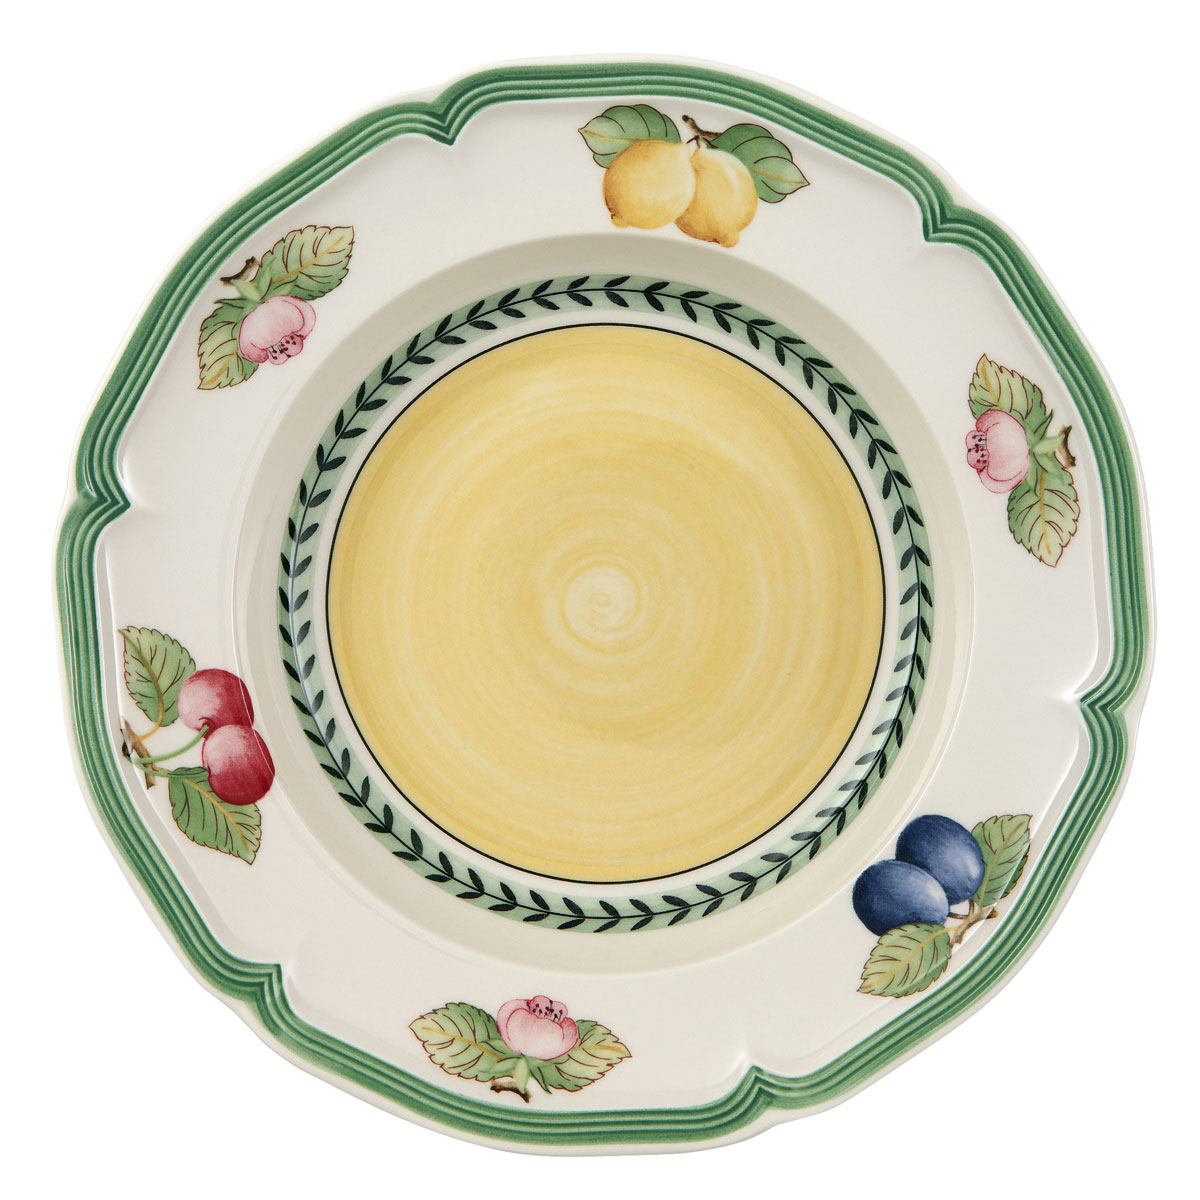 Villeroy and Boch French Garden Fleurence Rim Soup, Single